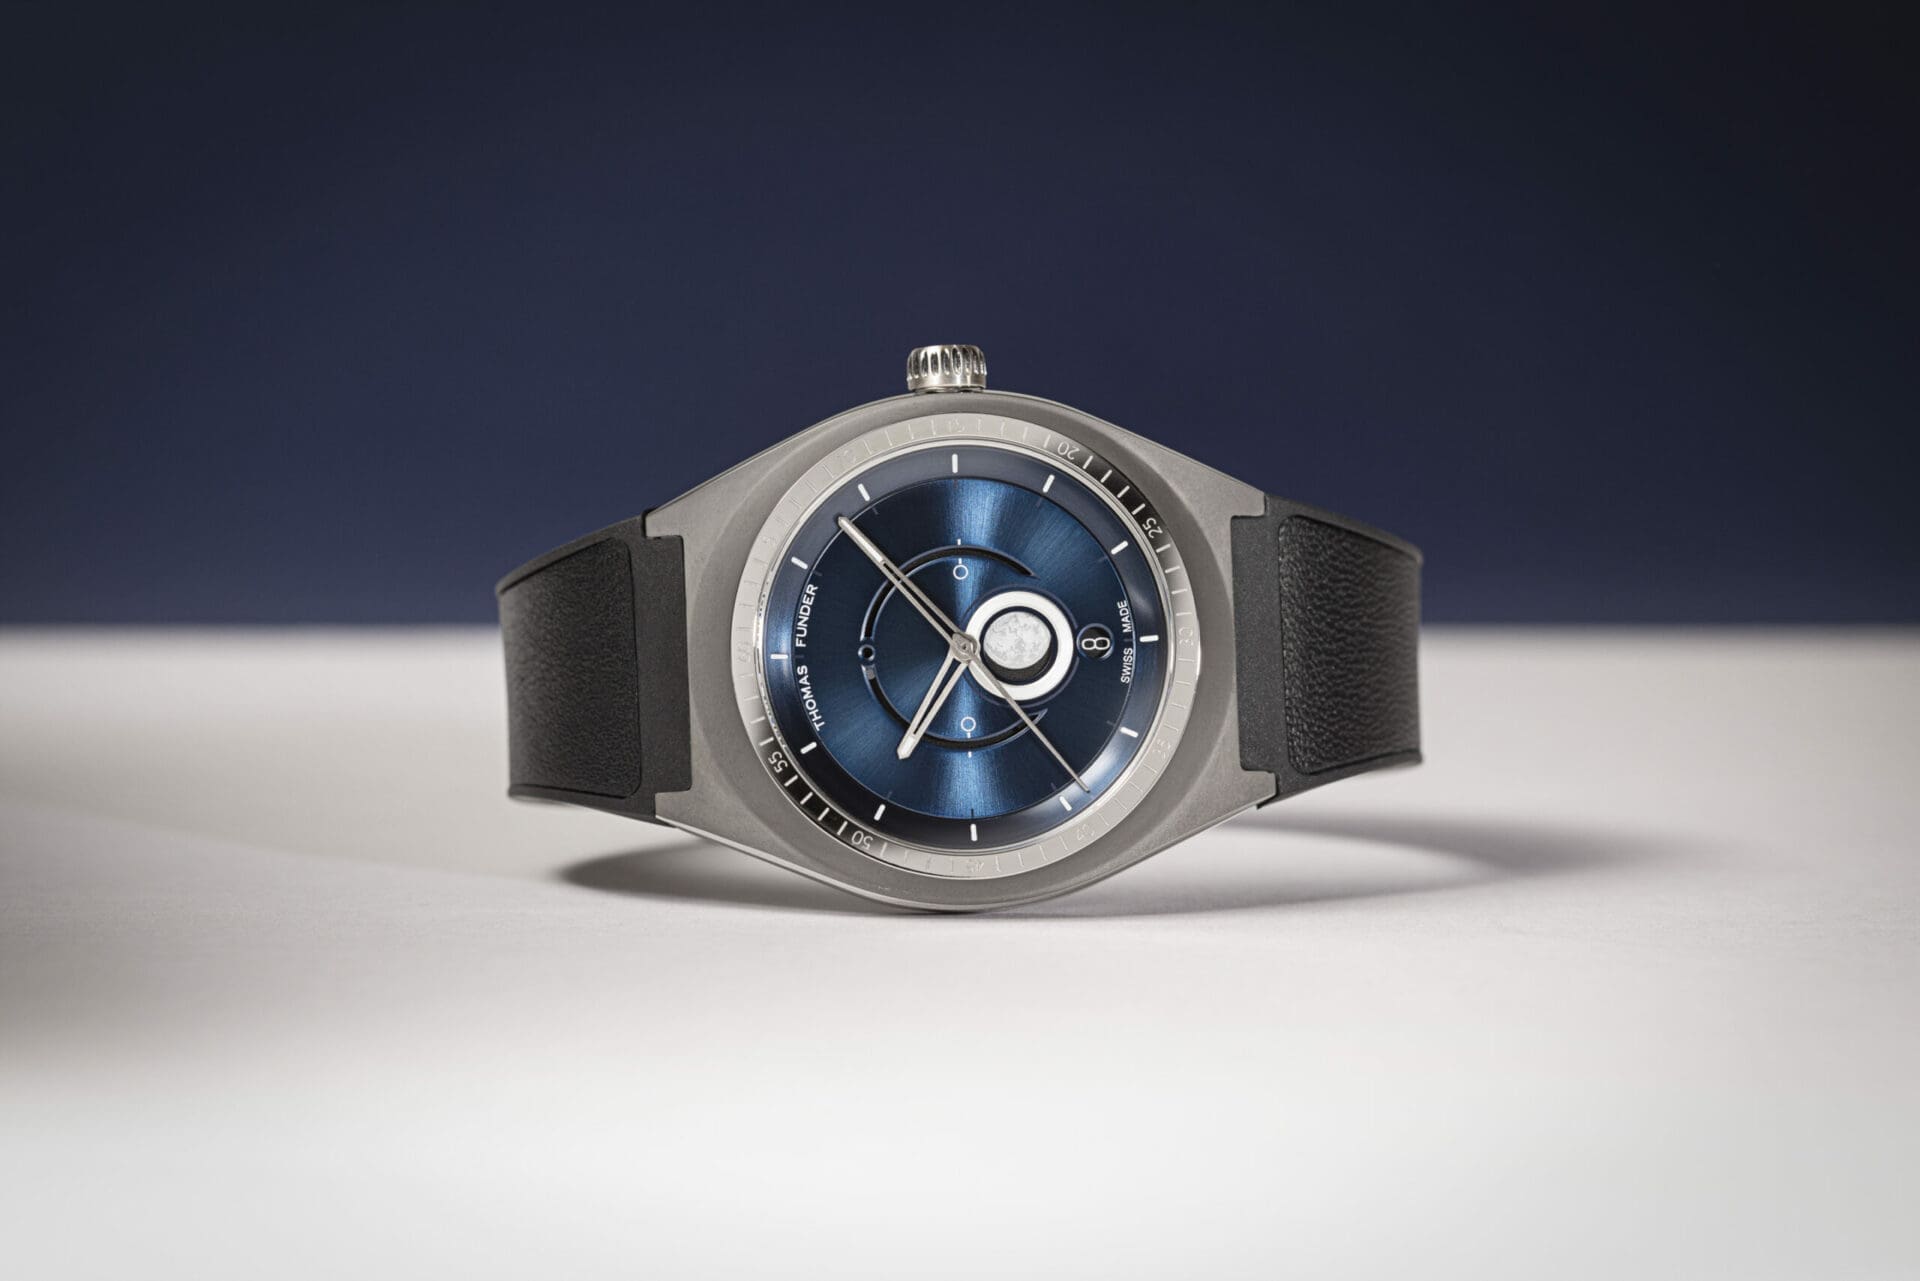 MICRO MONDAYS: The Funder Måne delivers a modular moonphase collection in a single watch